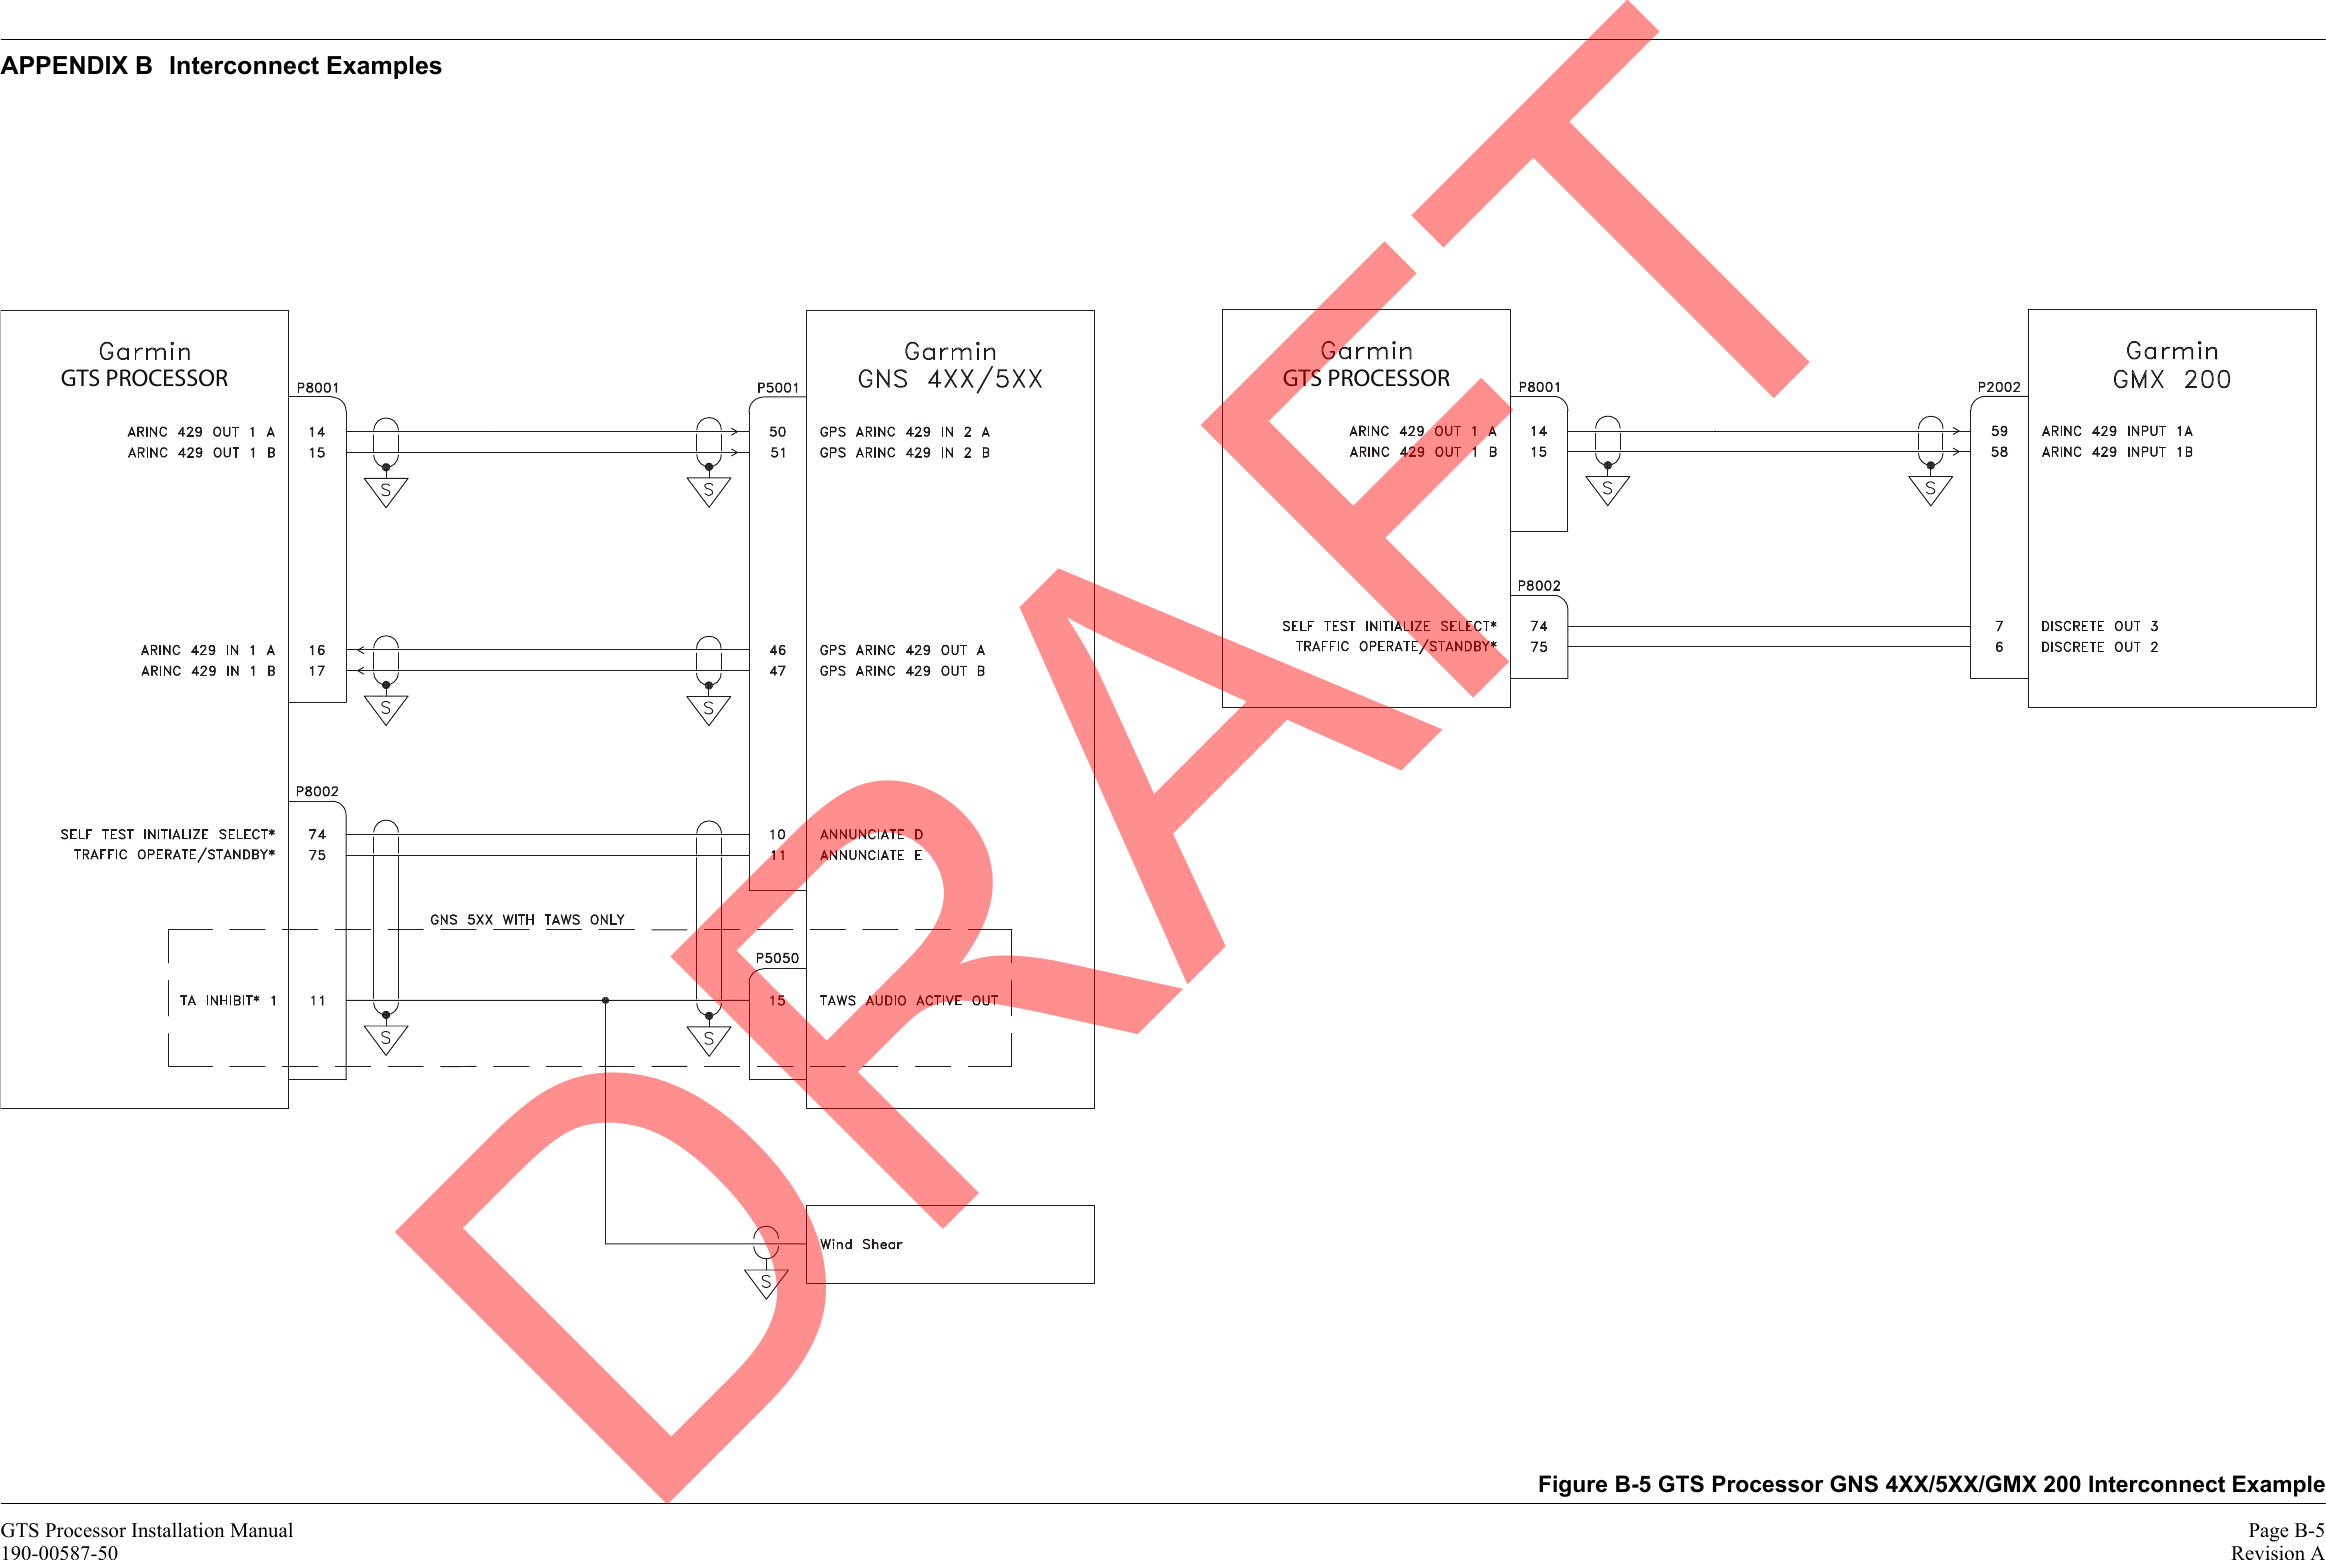 GTS Processor Installation Manual Page B-5190-00587-50 Revision AAPPENDIX B Interconnect ExamplesFigure B-5 GTS Processor GNS 4XX/5XX/GMX 200 Interconnect Example GTS PROCESSOR GTS PROCESSORDRAFT